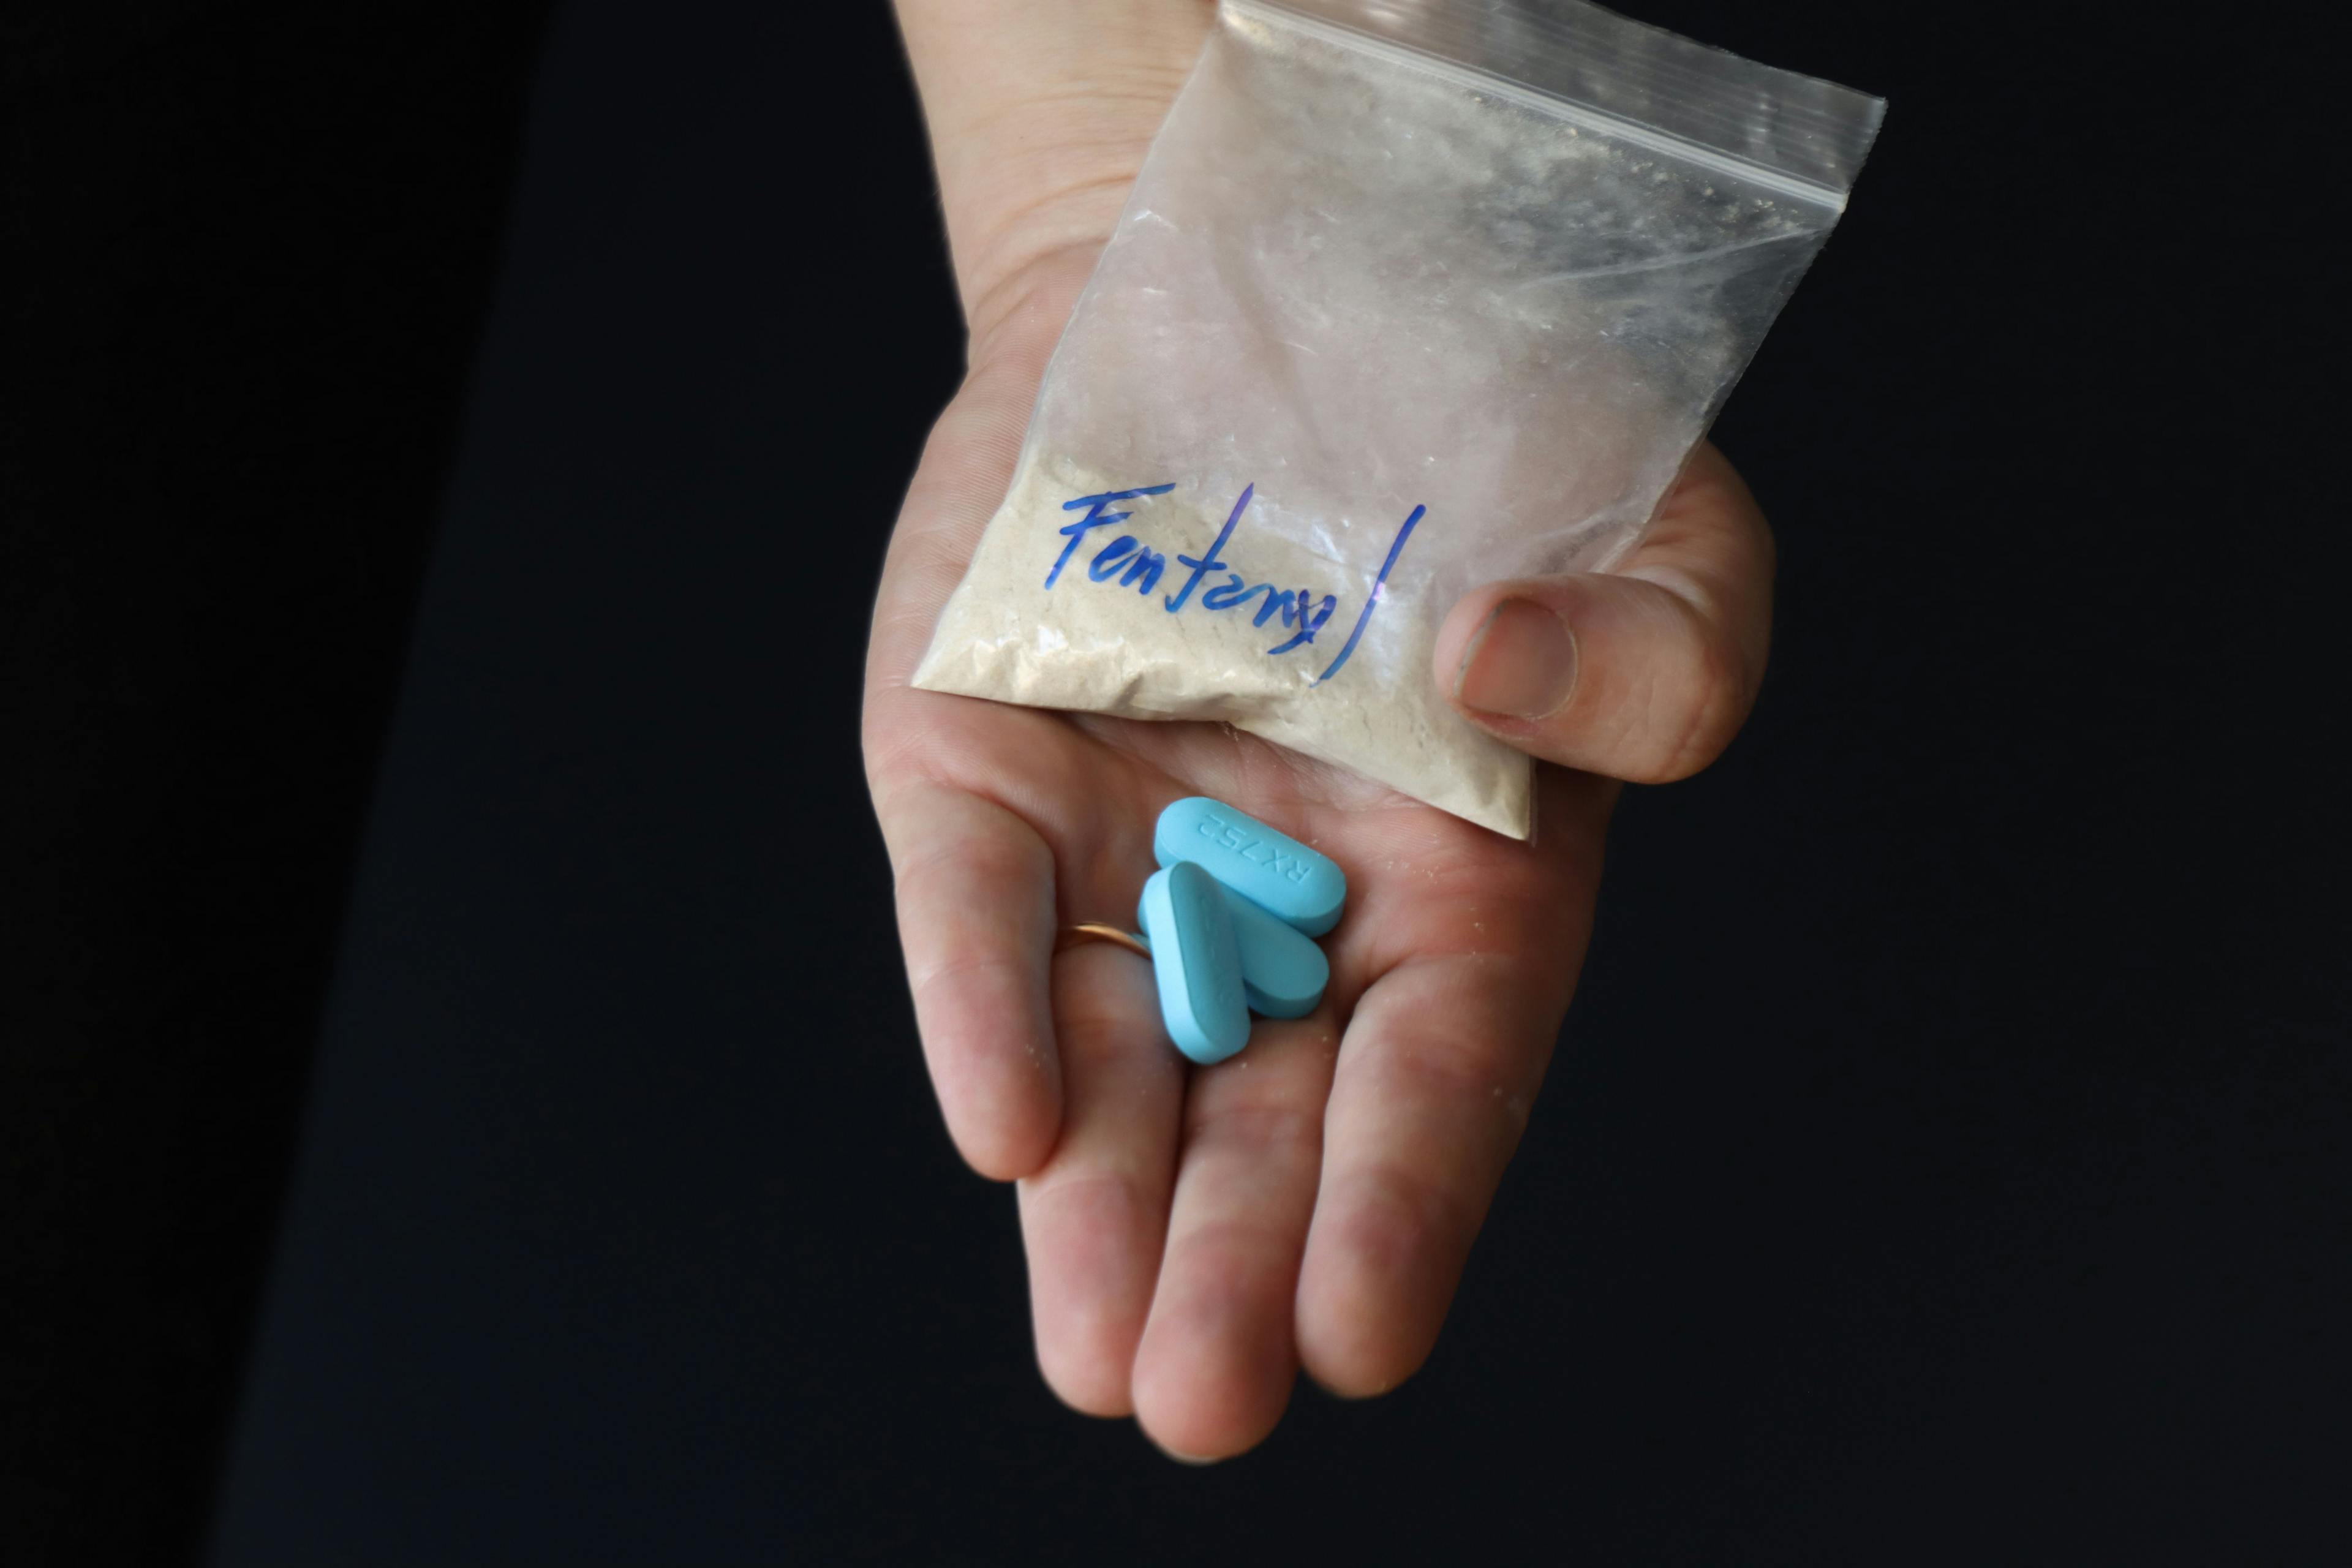 Woman holding a pack with fentanyl powder and pills to illustrate the drug addiction | Image Credit: © Jeniffer - stock.adobe.com